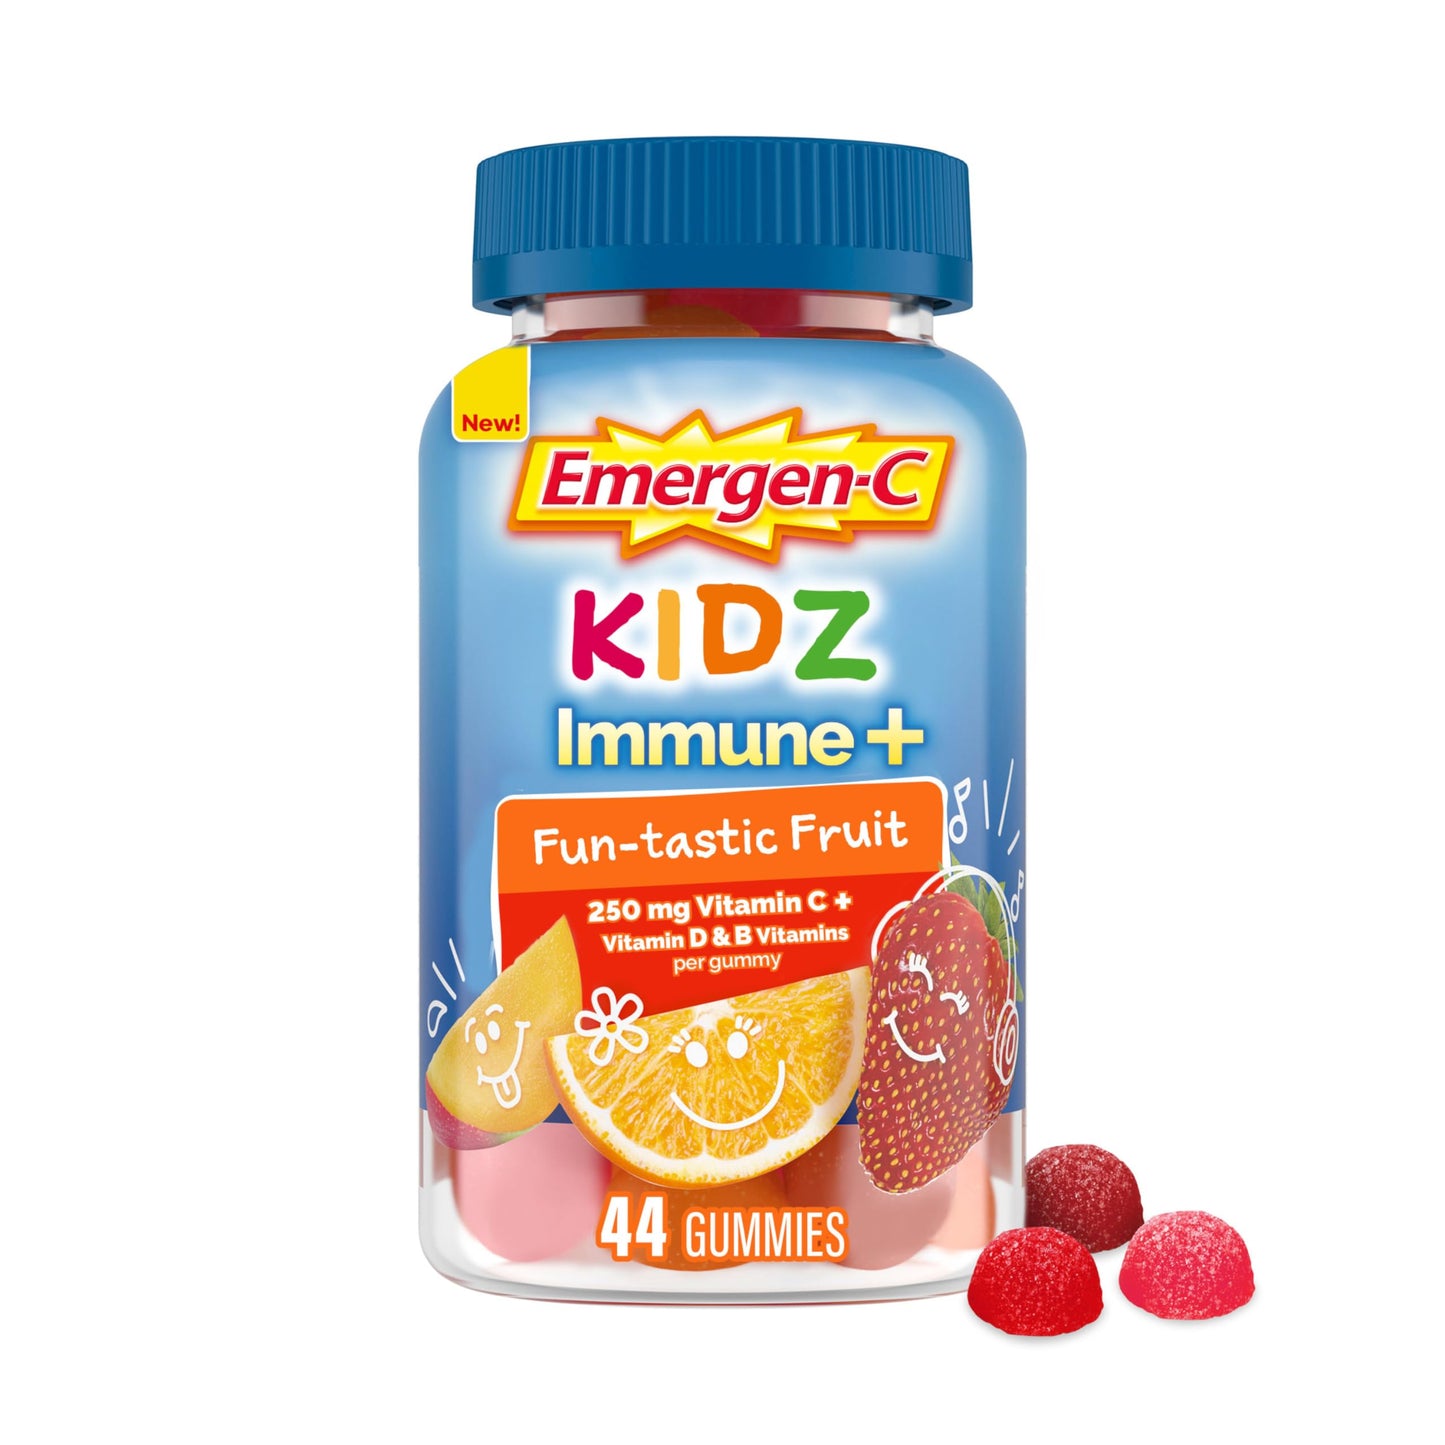 Emergen-C Kidz Immune+ Immune Support Dietary Supplements, Flavored Gummies with Vitamin C, B Vitamins and D for Support, Fun-Tastic Fruit - 44 Count